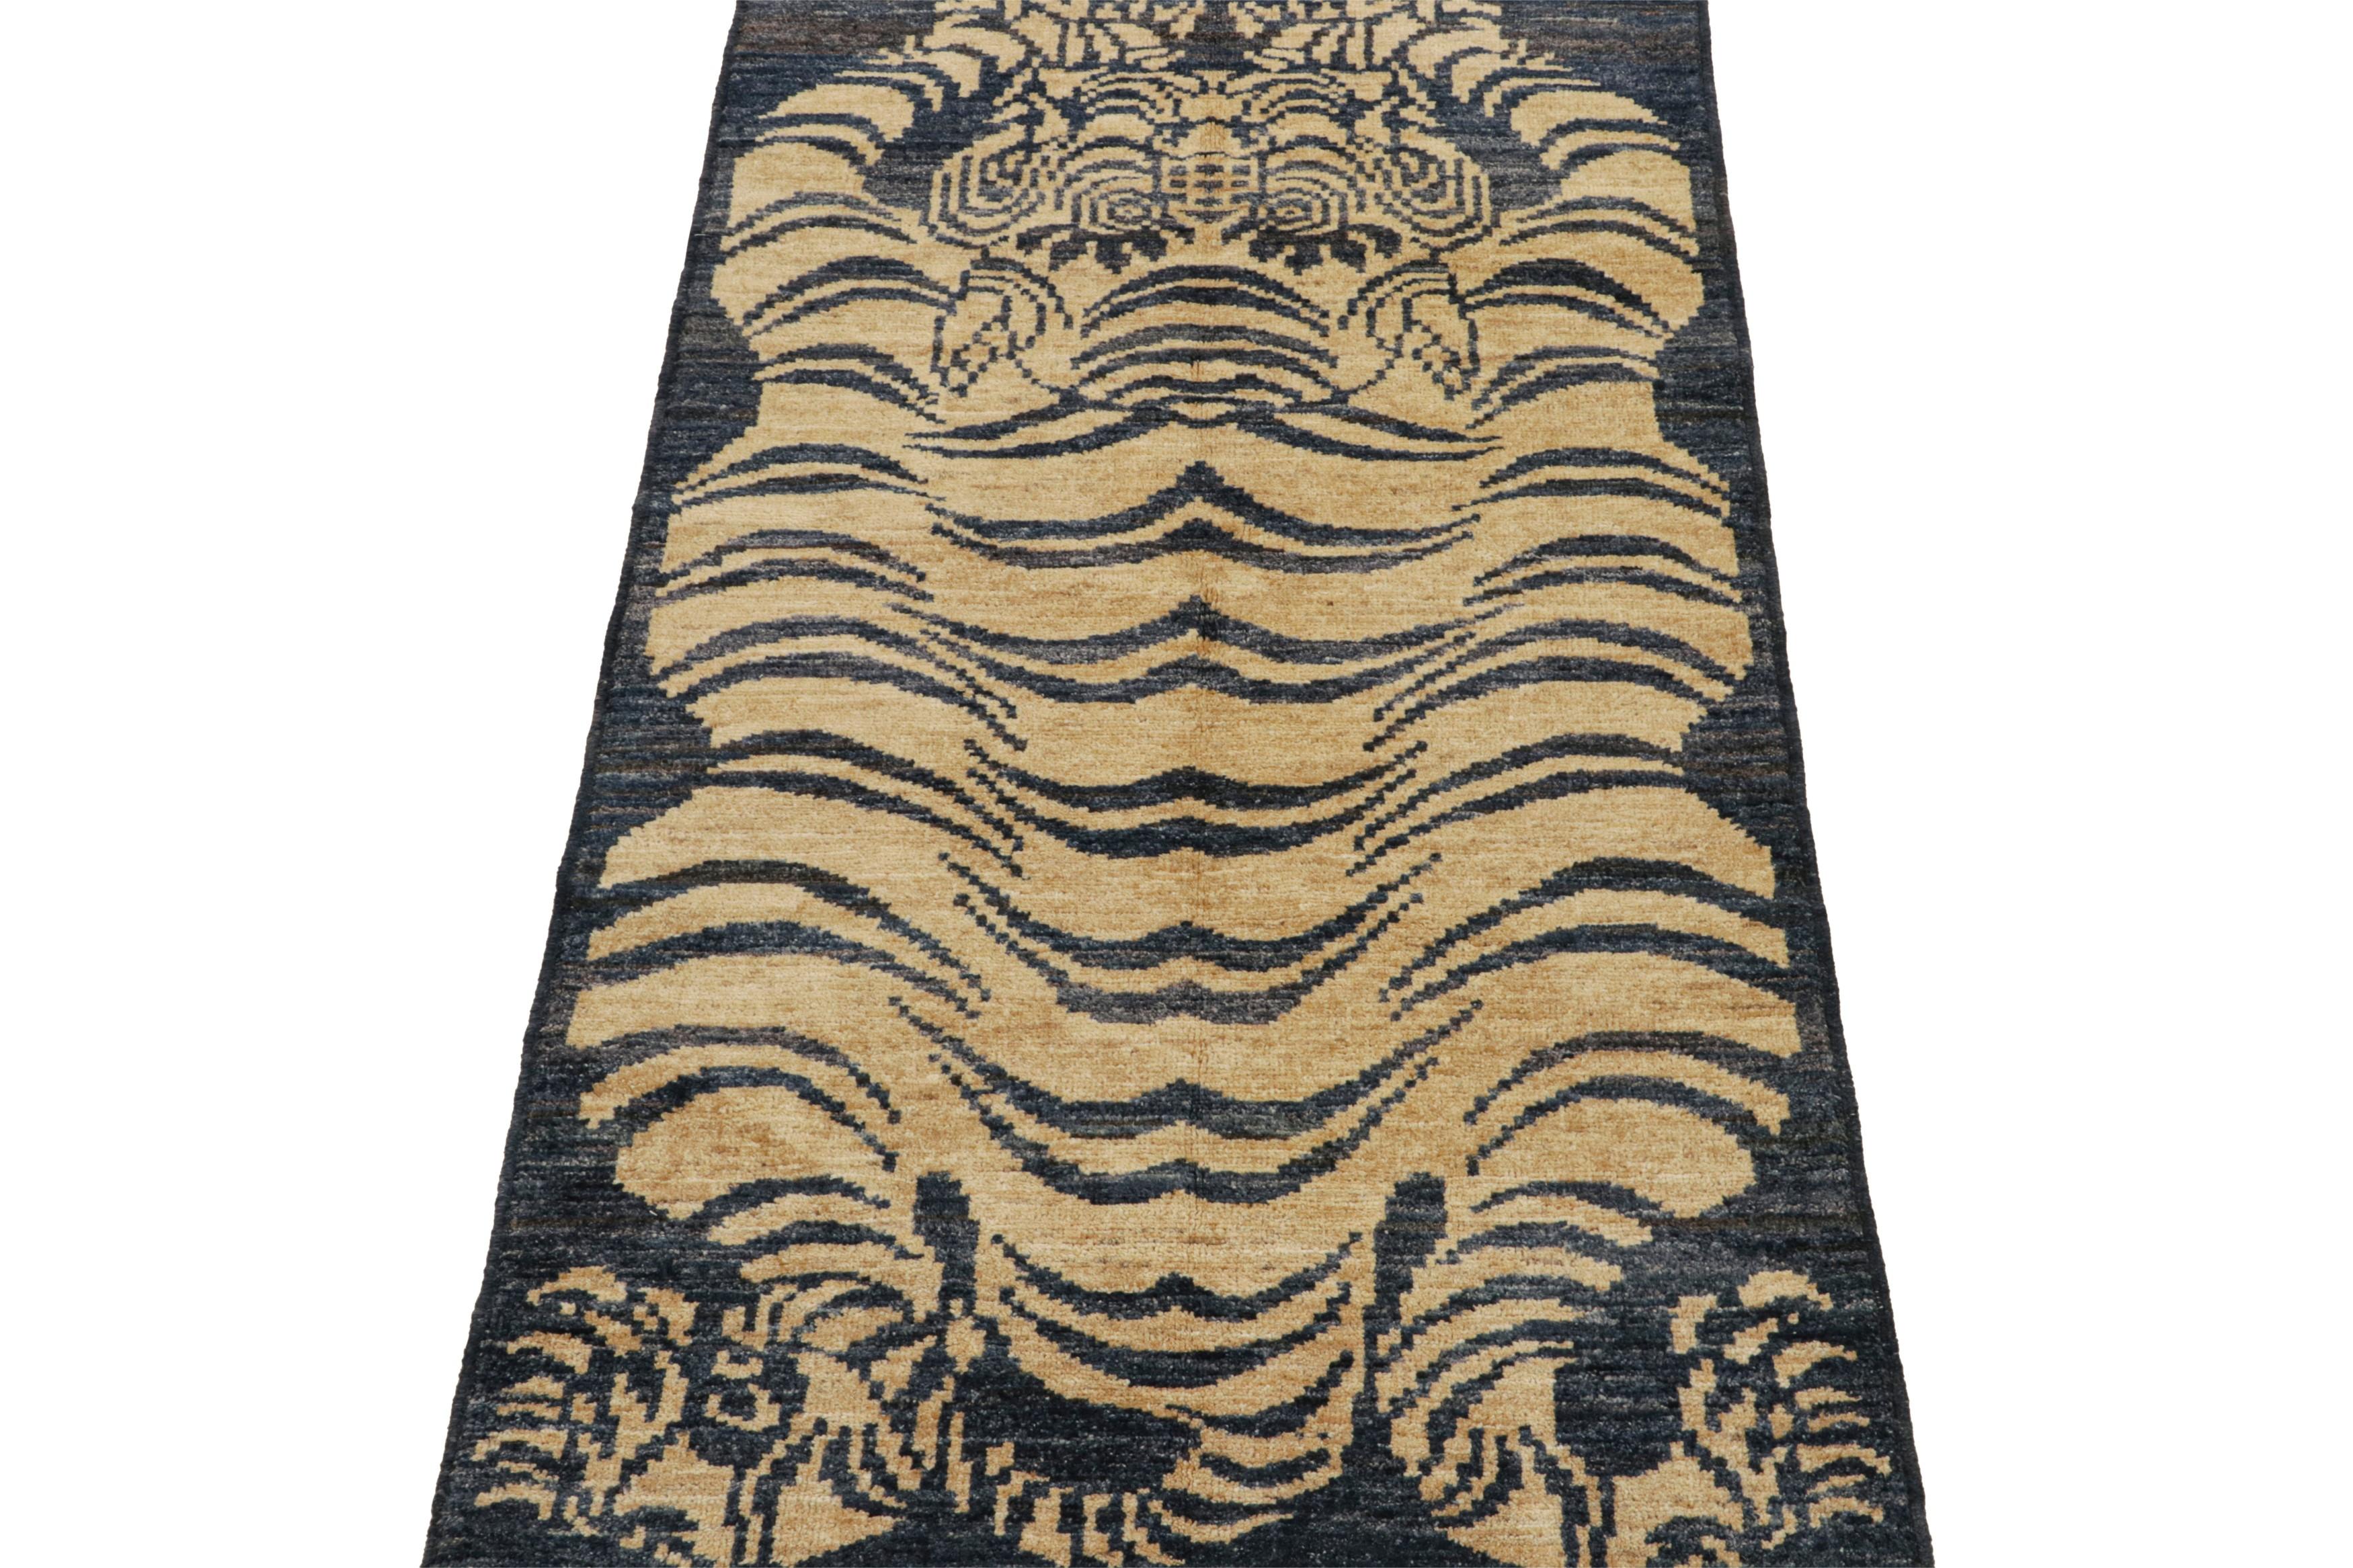 Afghan Tapis & Kilim's Classic-Style Tiger-Skin Custom Runner with Blue & Gold Pictorial (en anglais) en vente